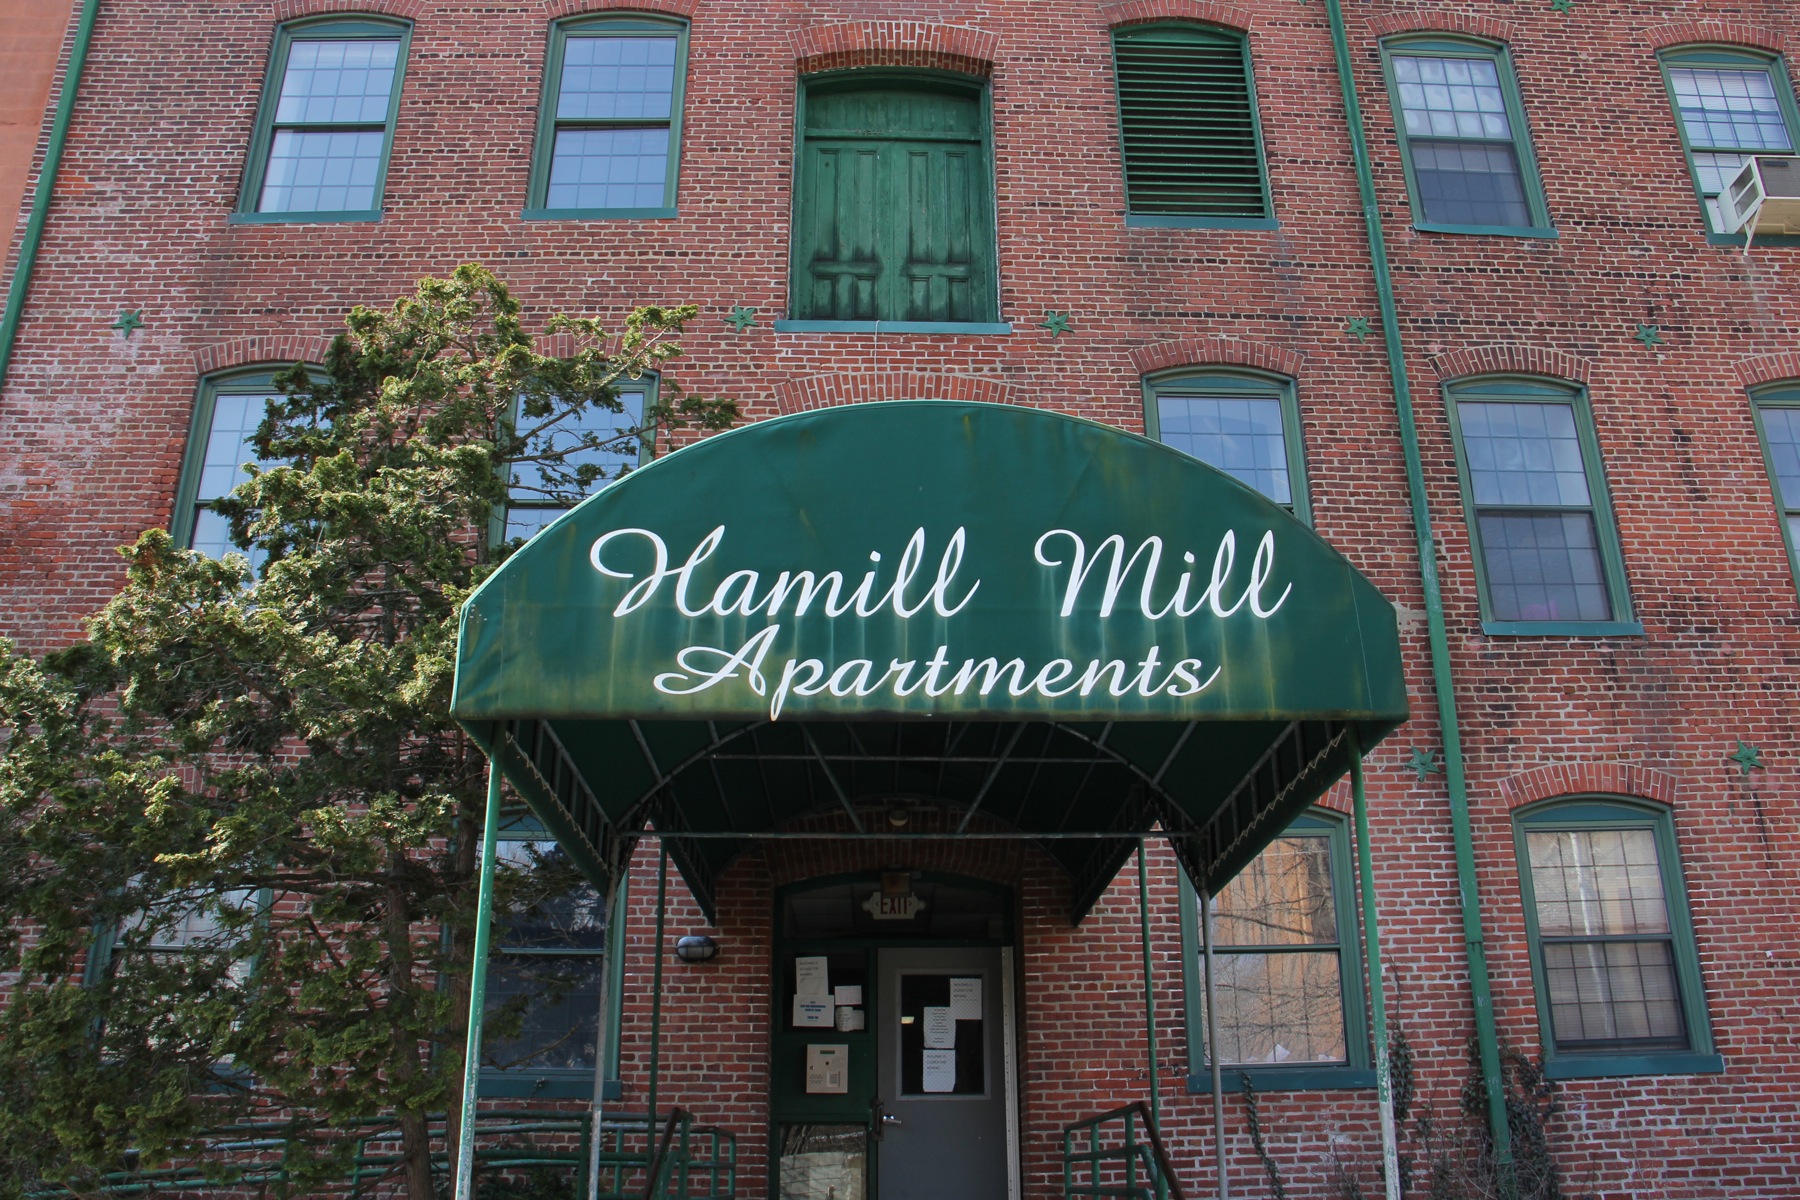 Hamill Mill Apartments in Germantown. (Emma Lee/WHYY)